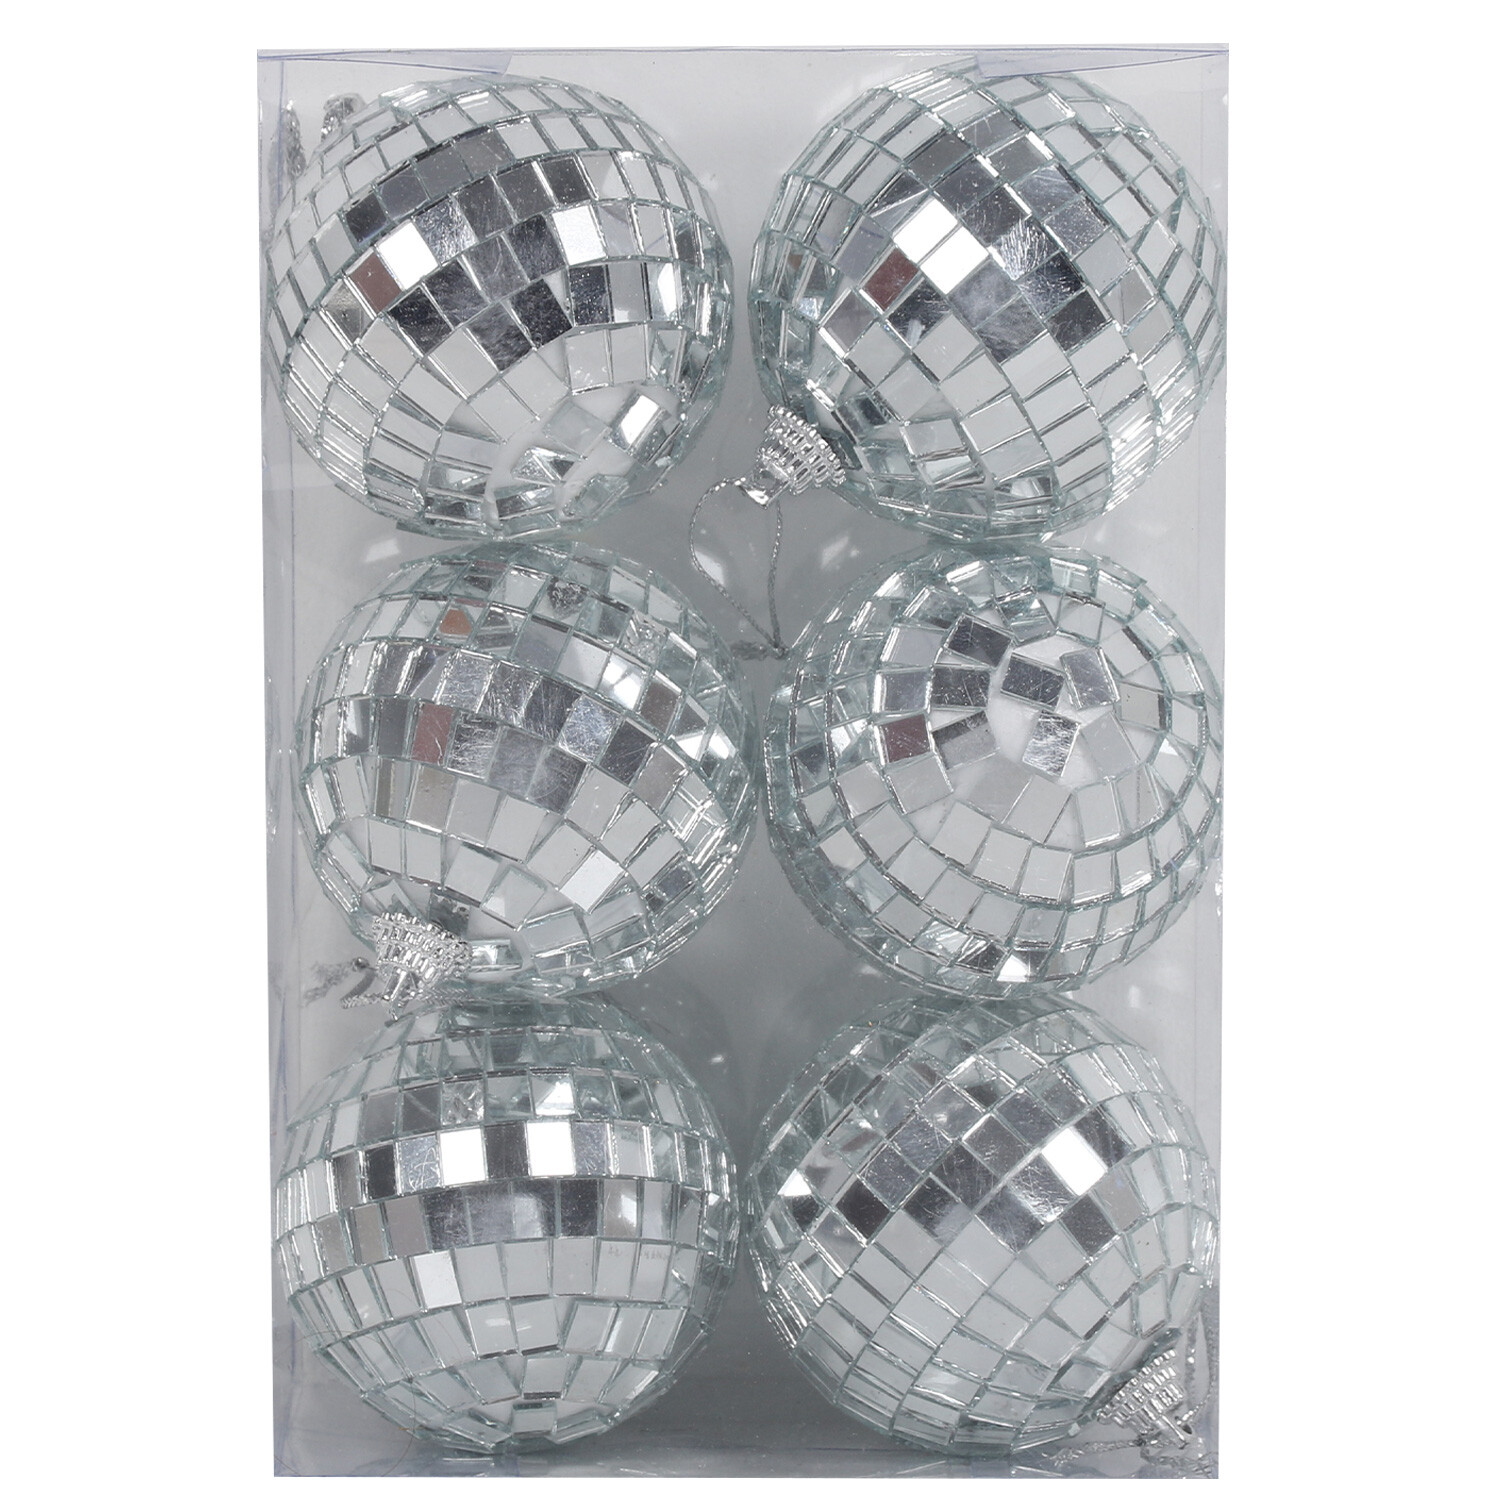 Set of 6 Mirror Ball Hanging Decorations - Silver Image